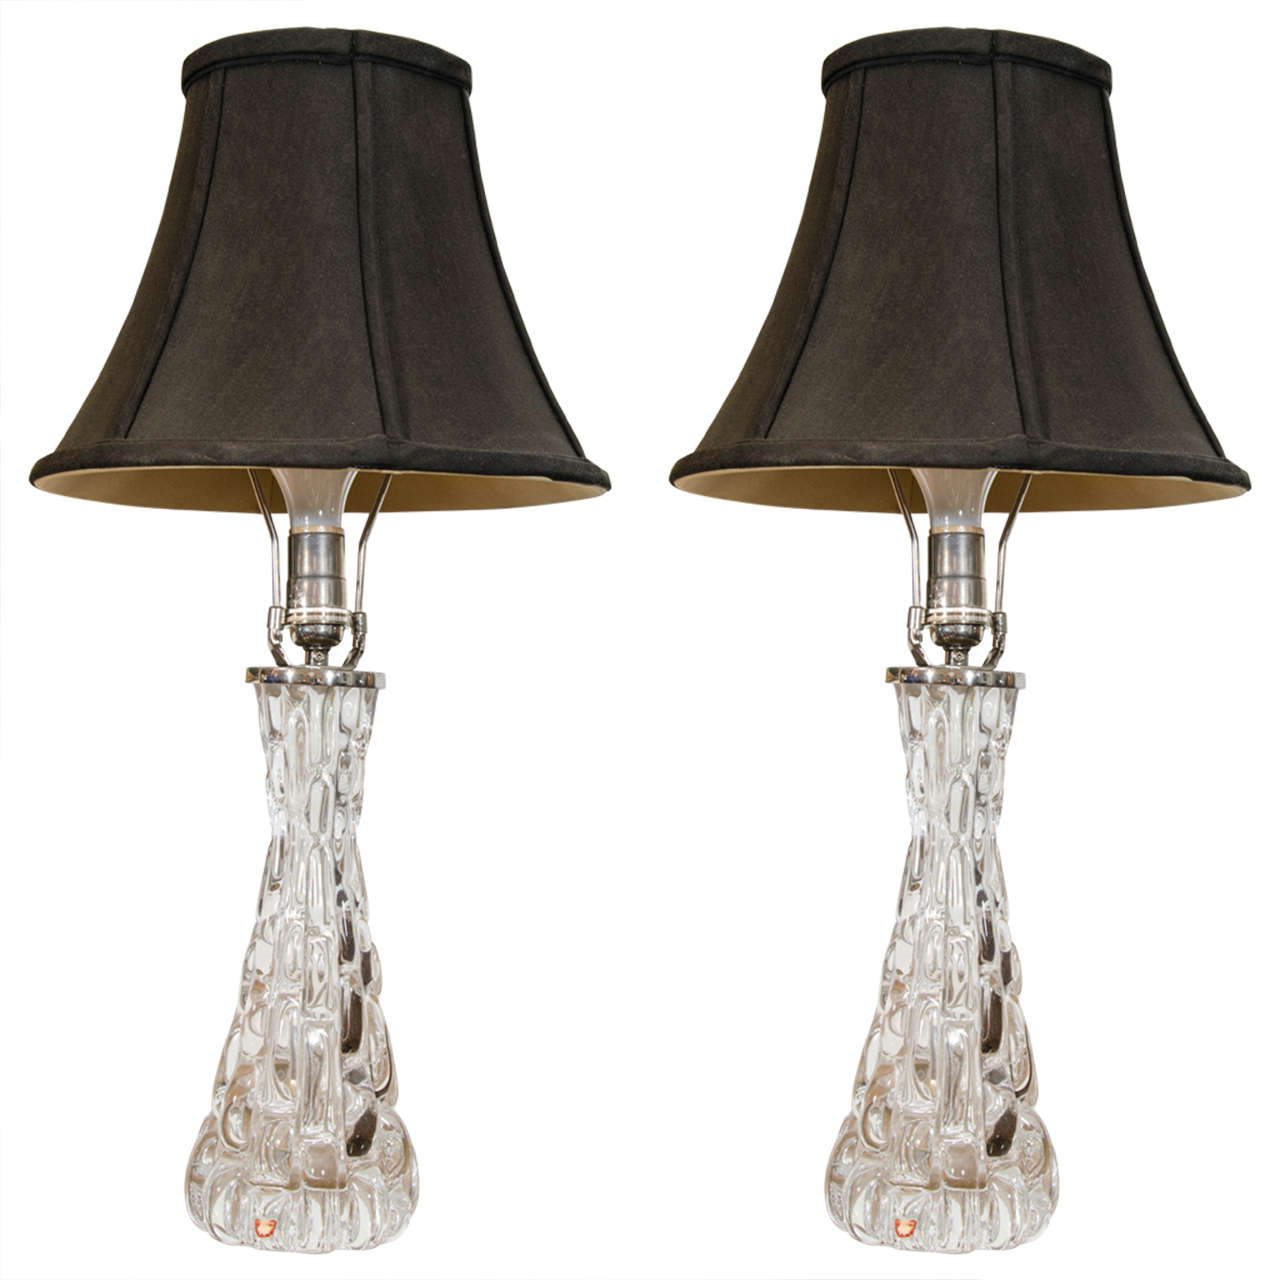 Pair of Orrefors Table Lamps